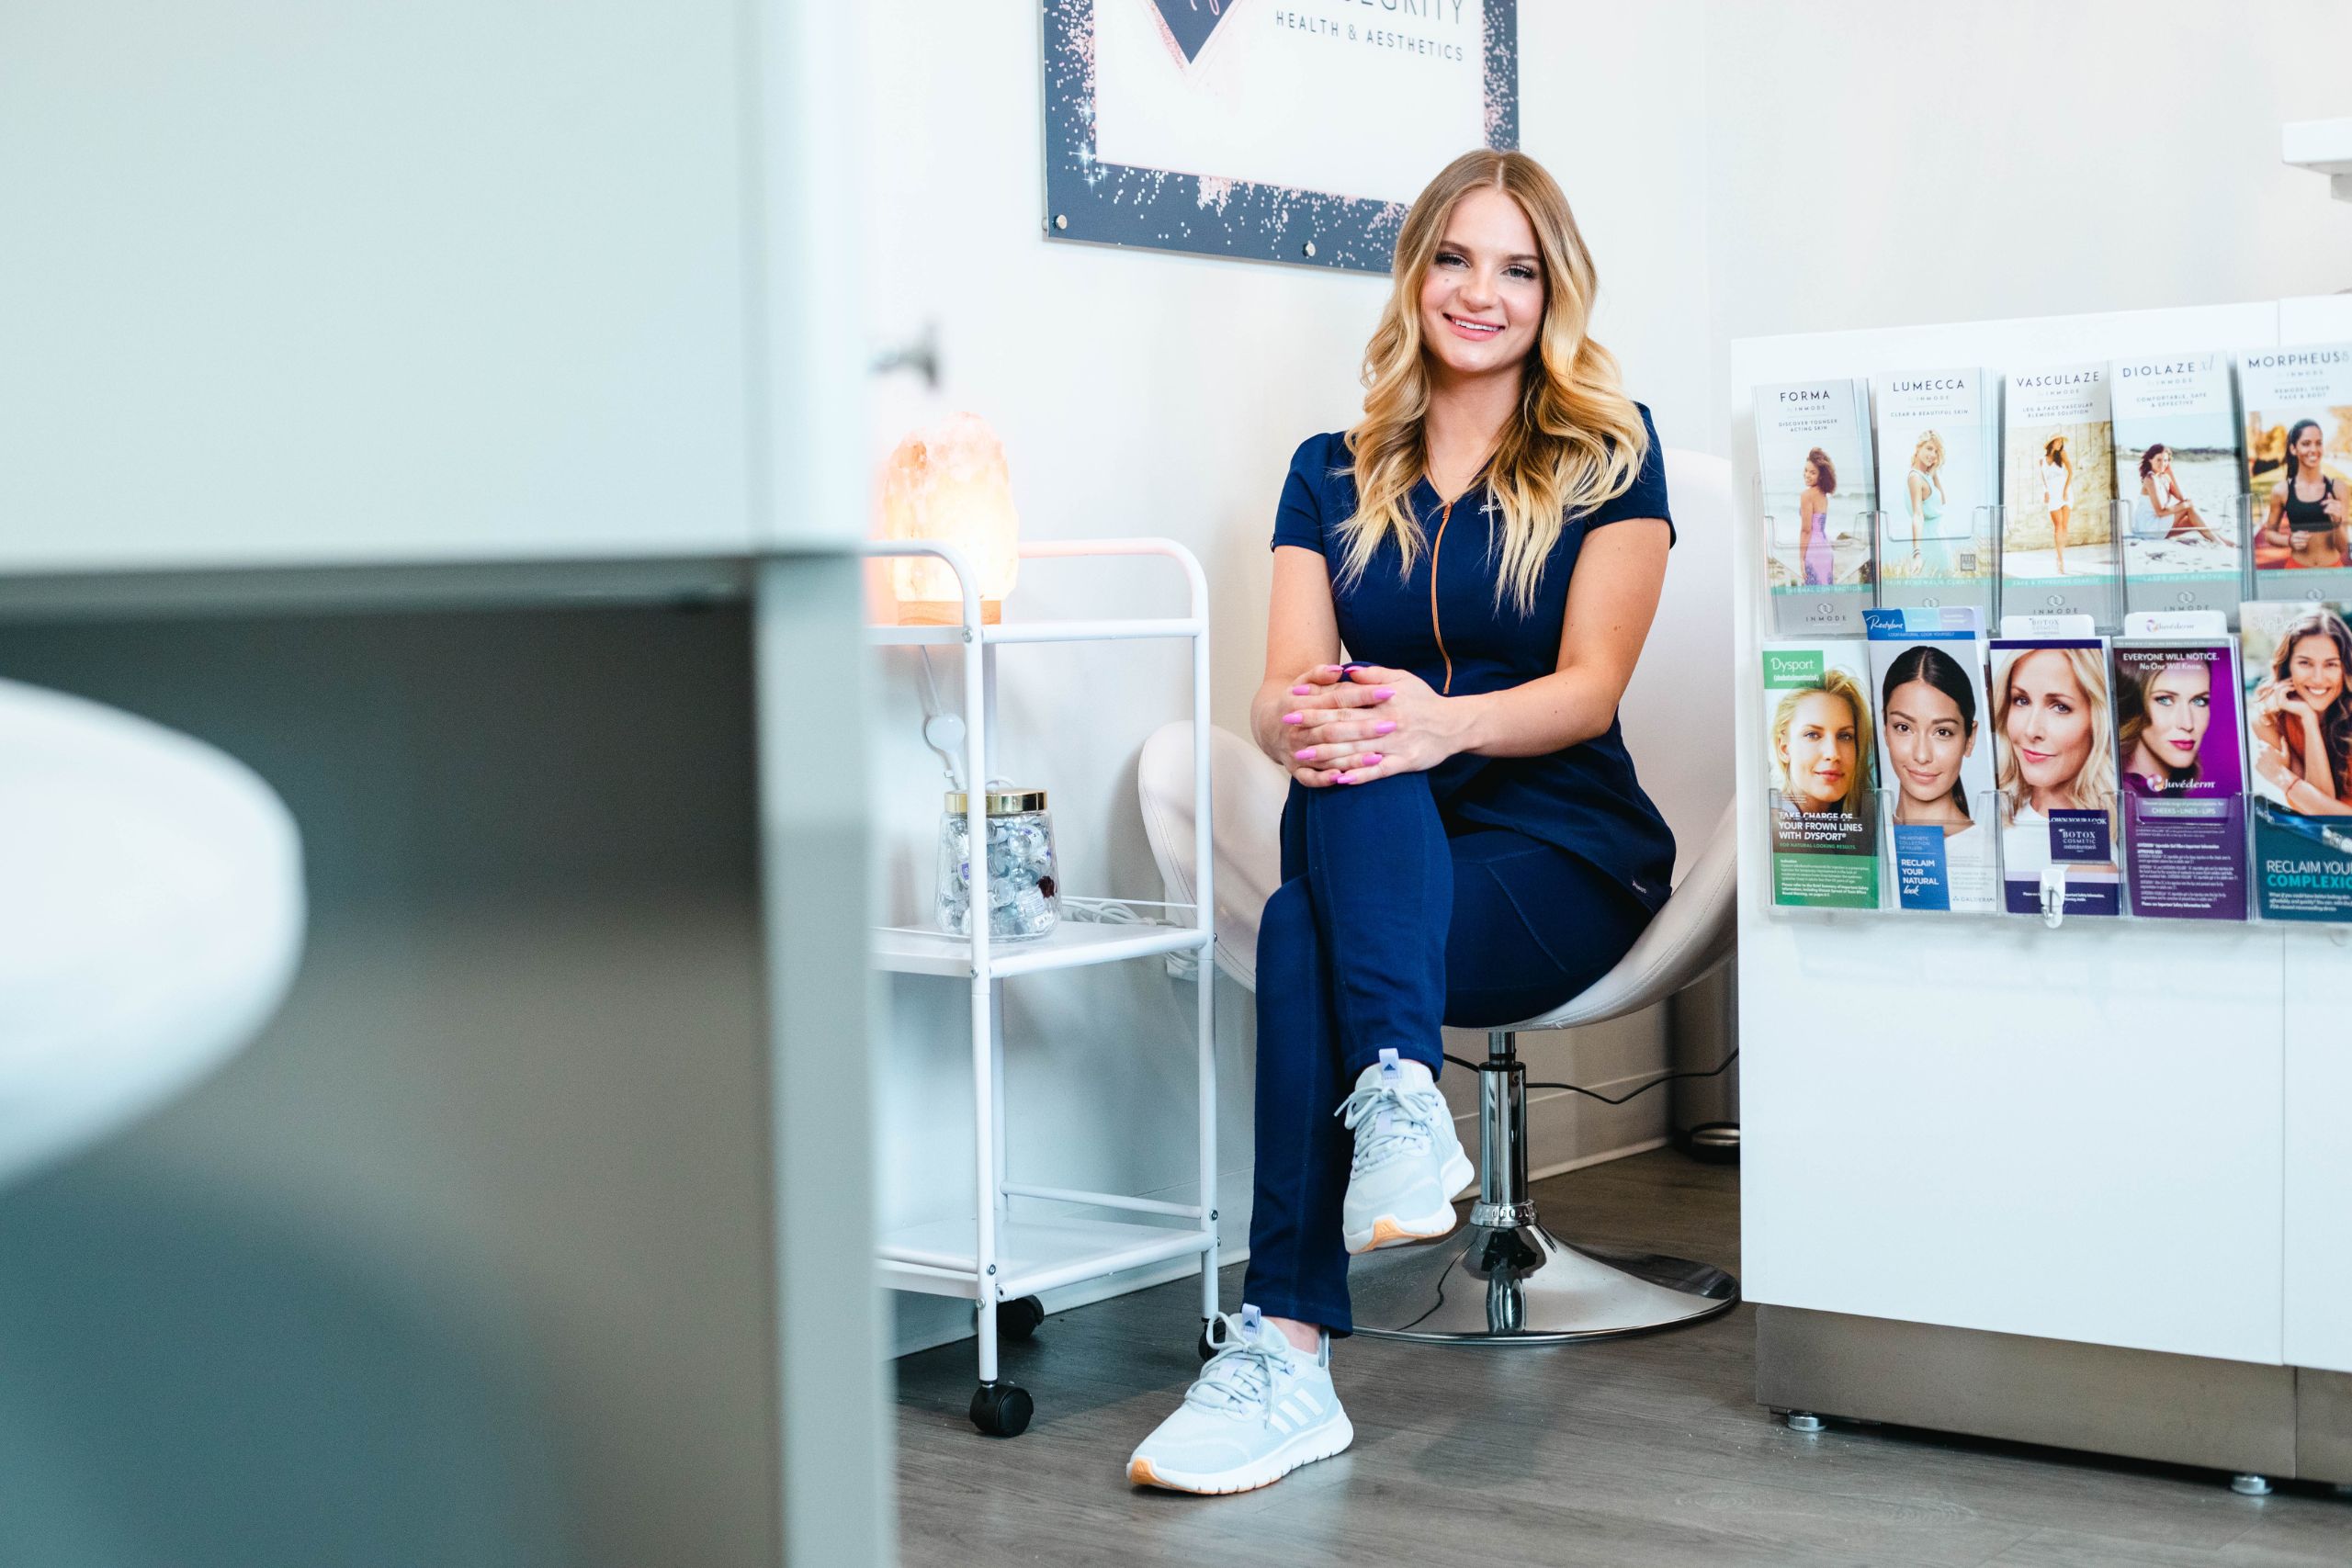 A medspa worker smiles at the camera while sitting in an office chair and crossing her legs.